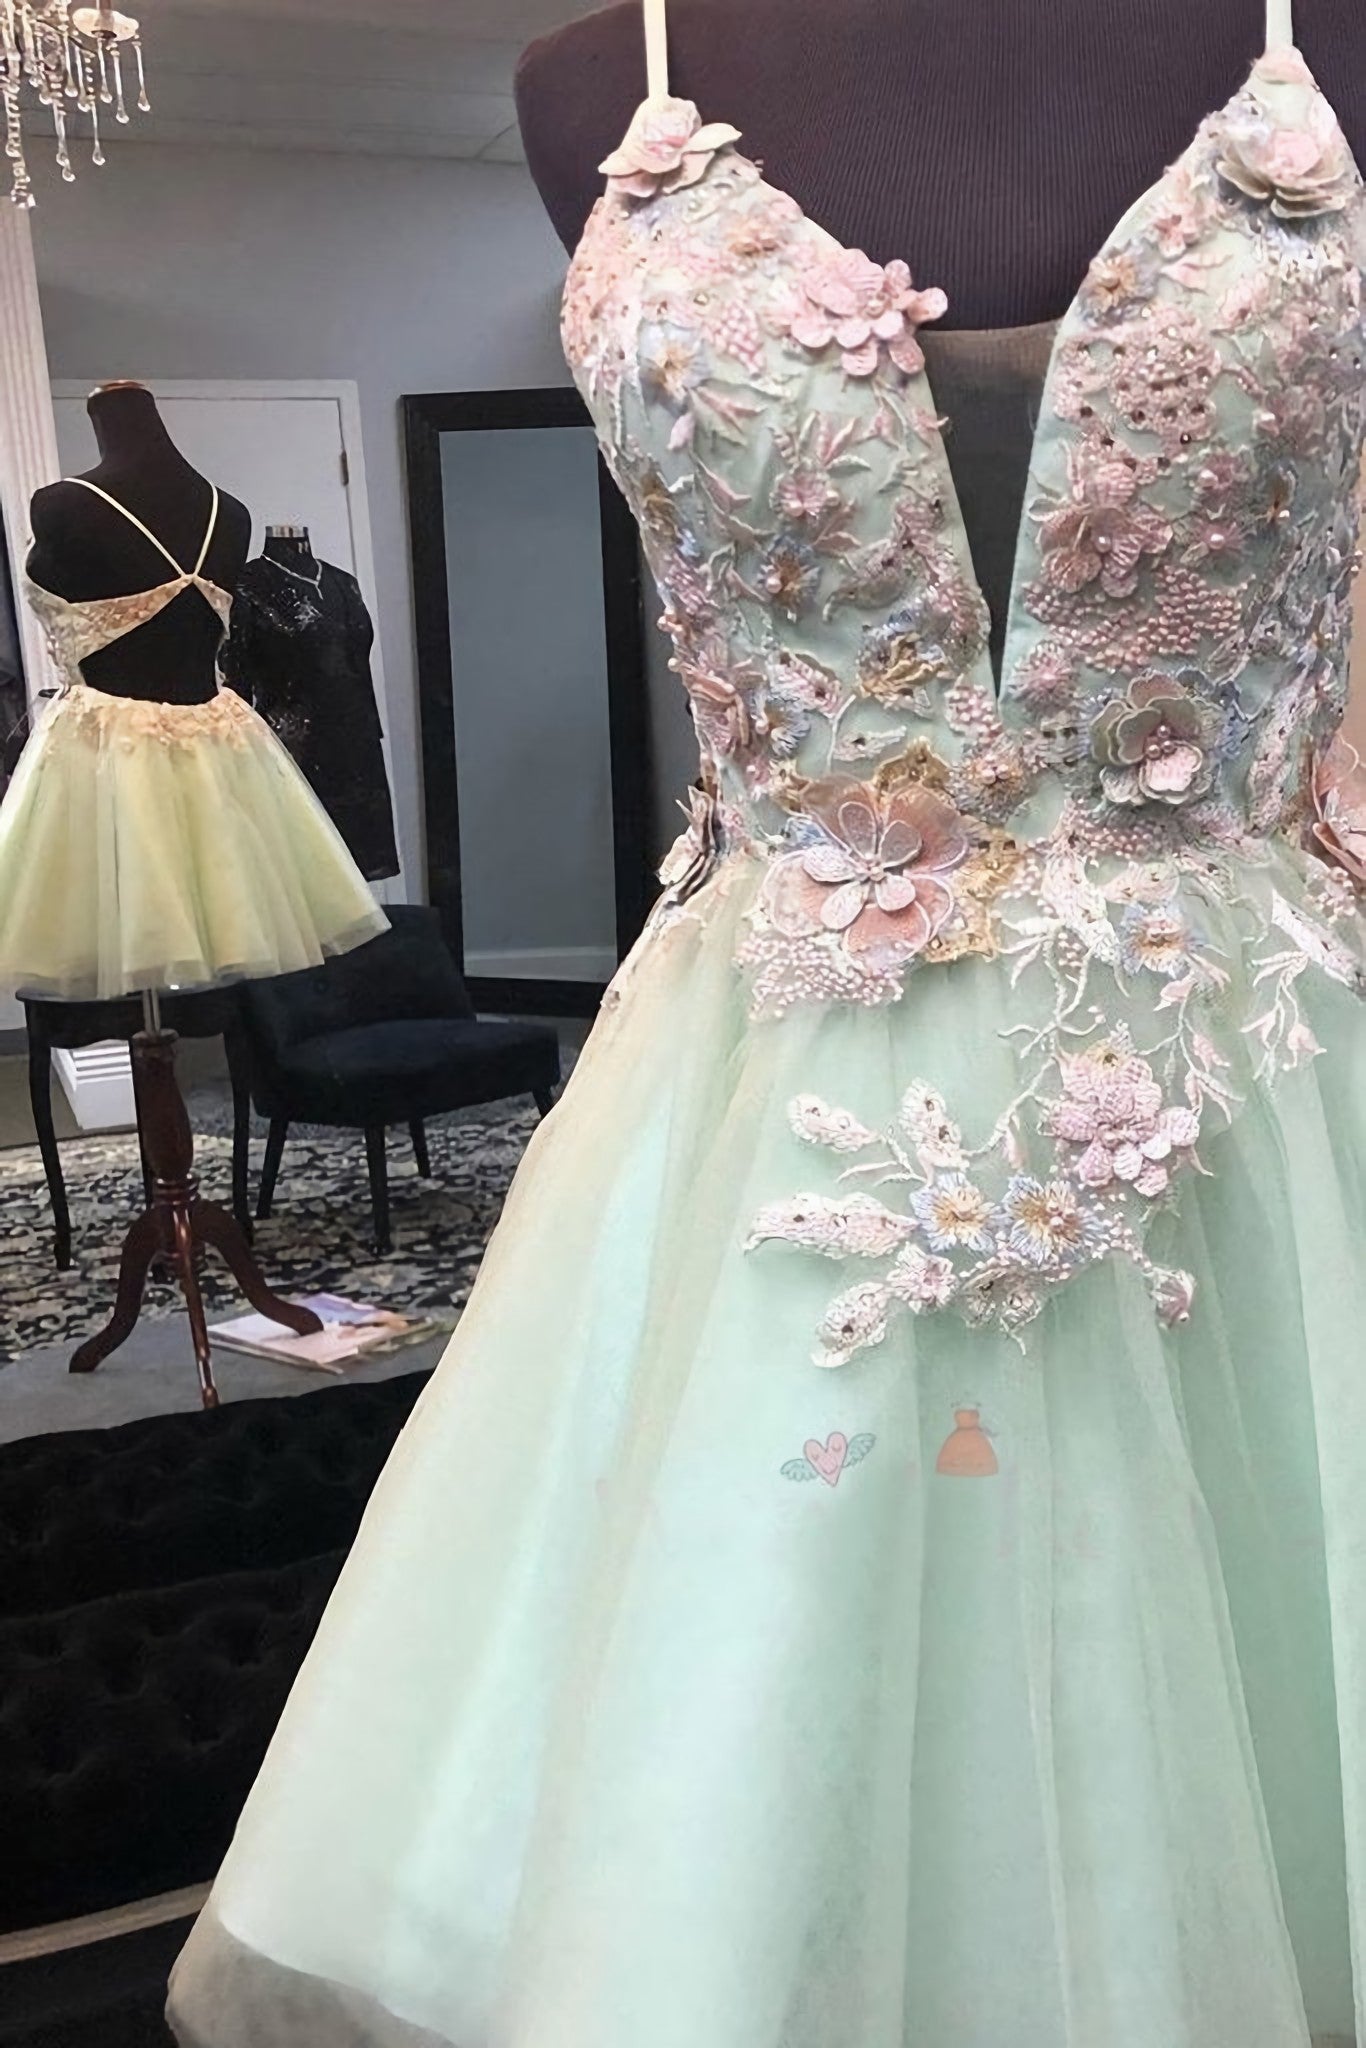 Prom Dresses With Sleeve, Mint Green Short Homecoming Dress, With Flowers Mini Tulle Graduation Dress, With Pearls